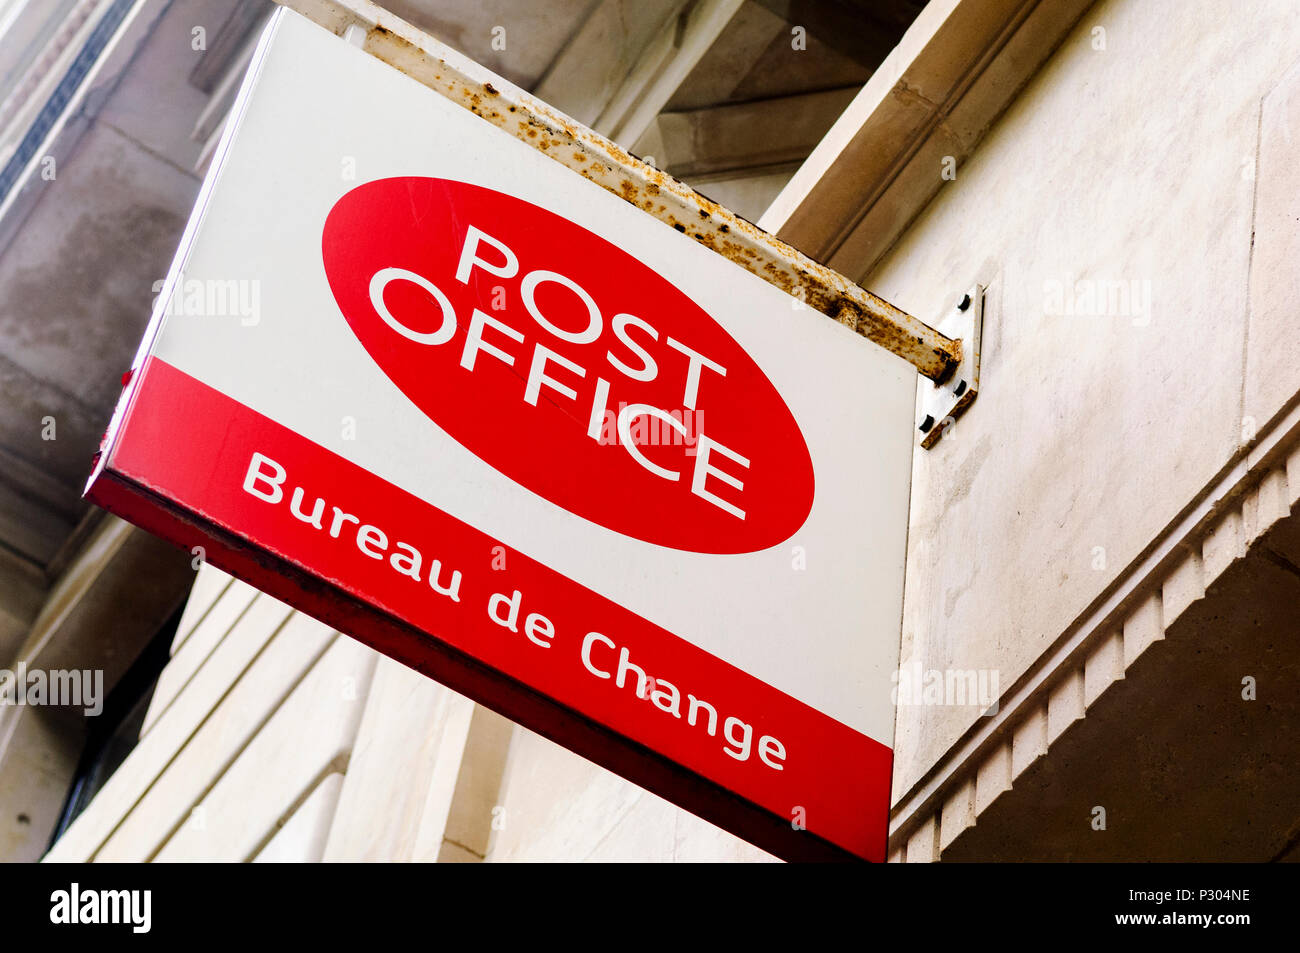 Post Office and Bureau de Change sign in Central London.  Red and white sign. Stock Photo